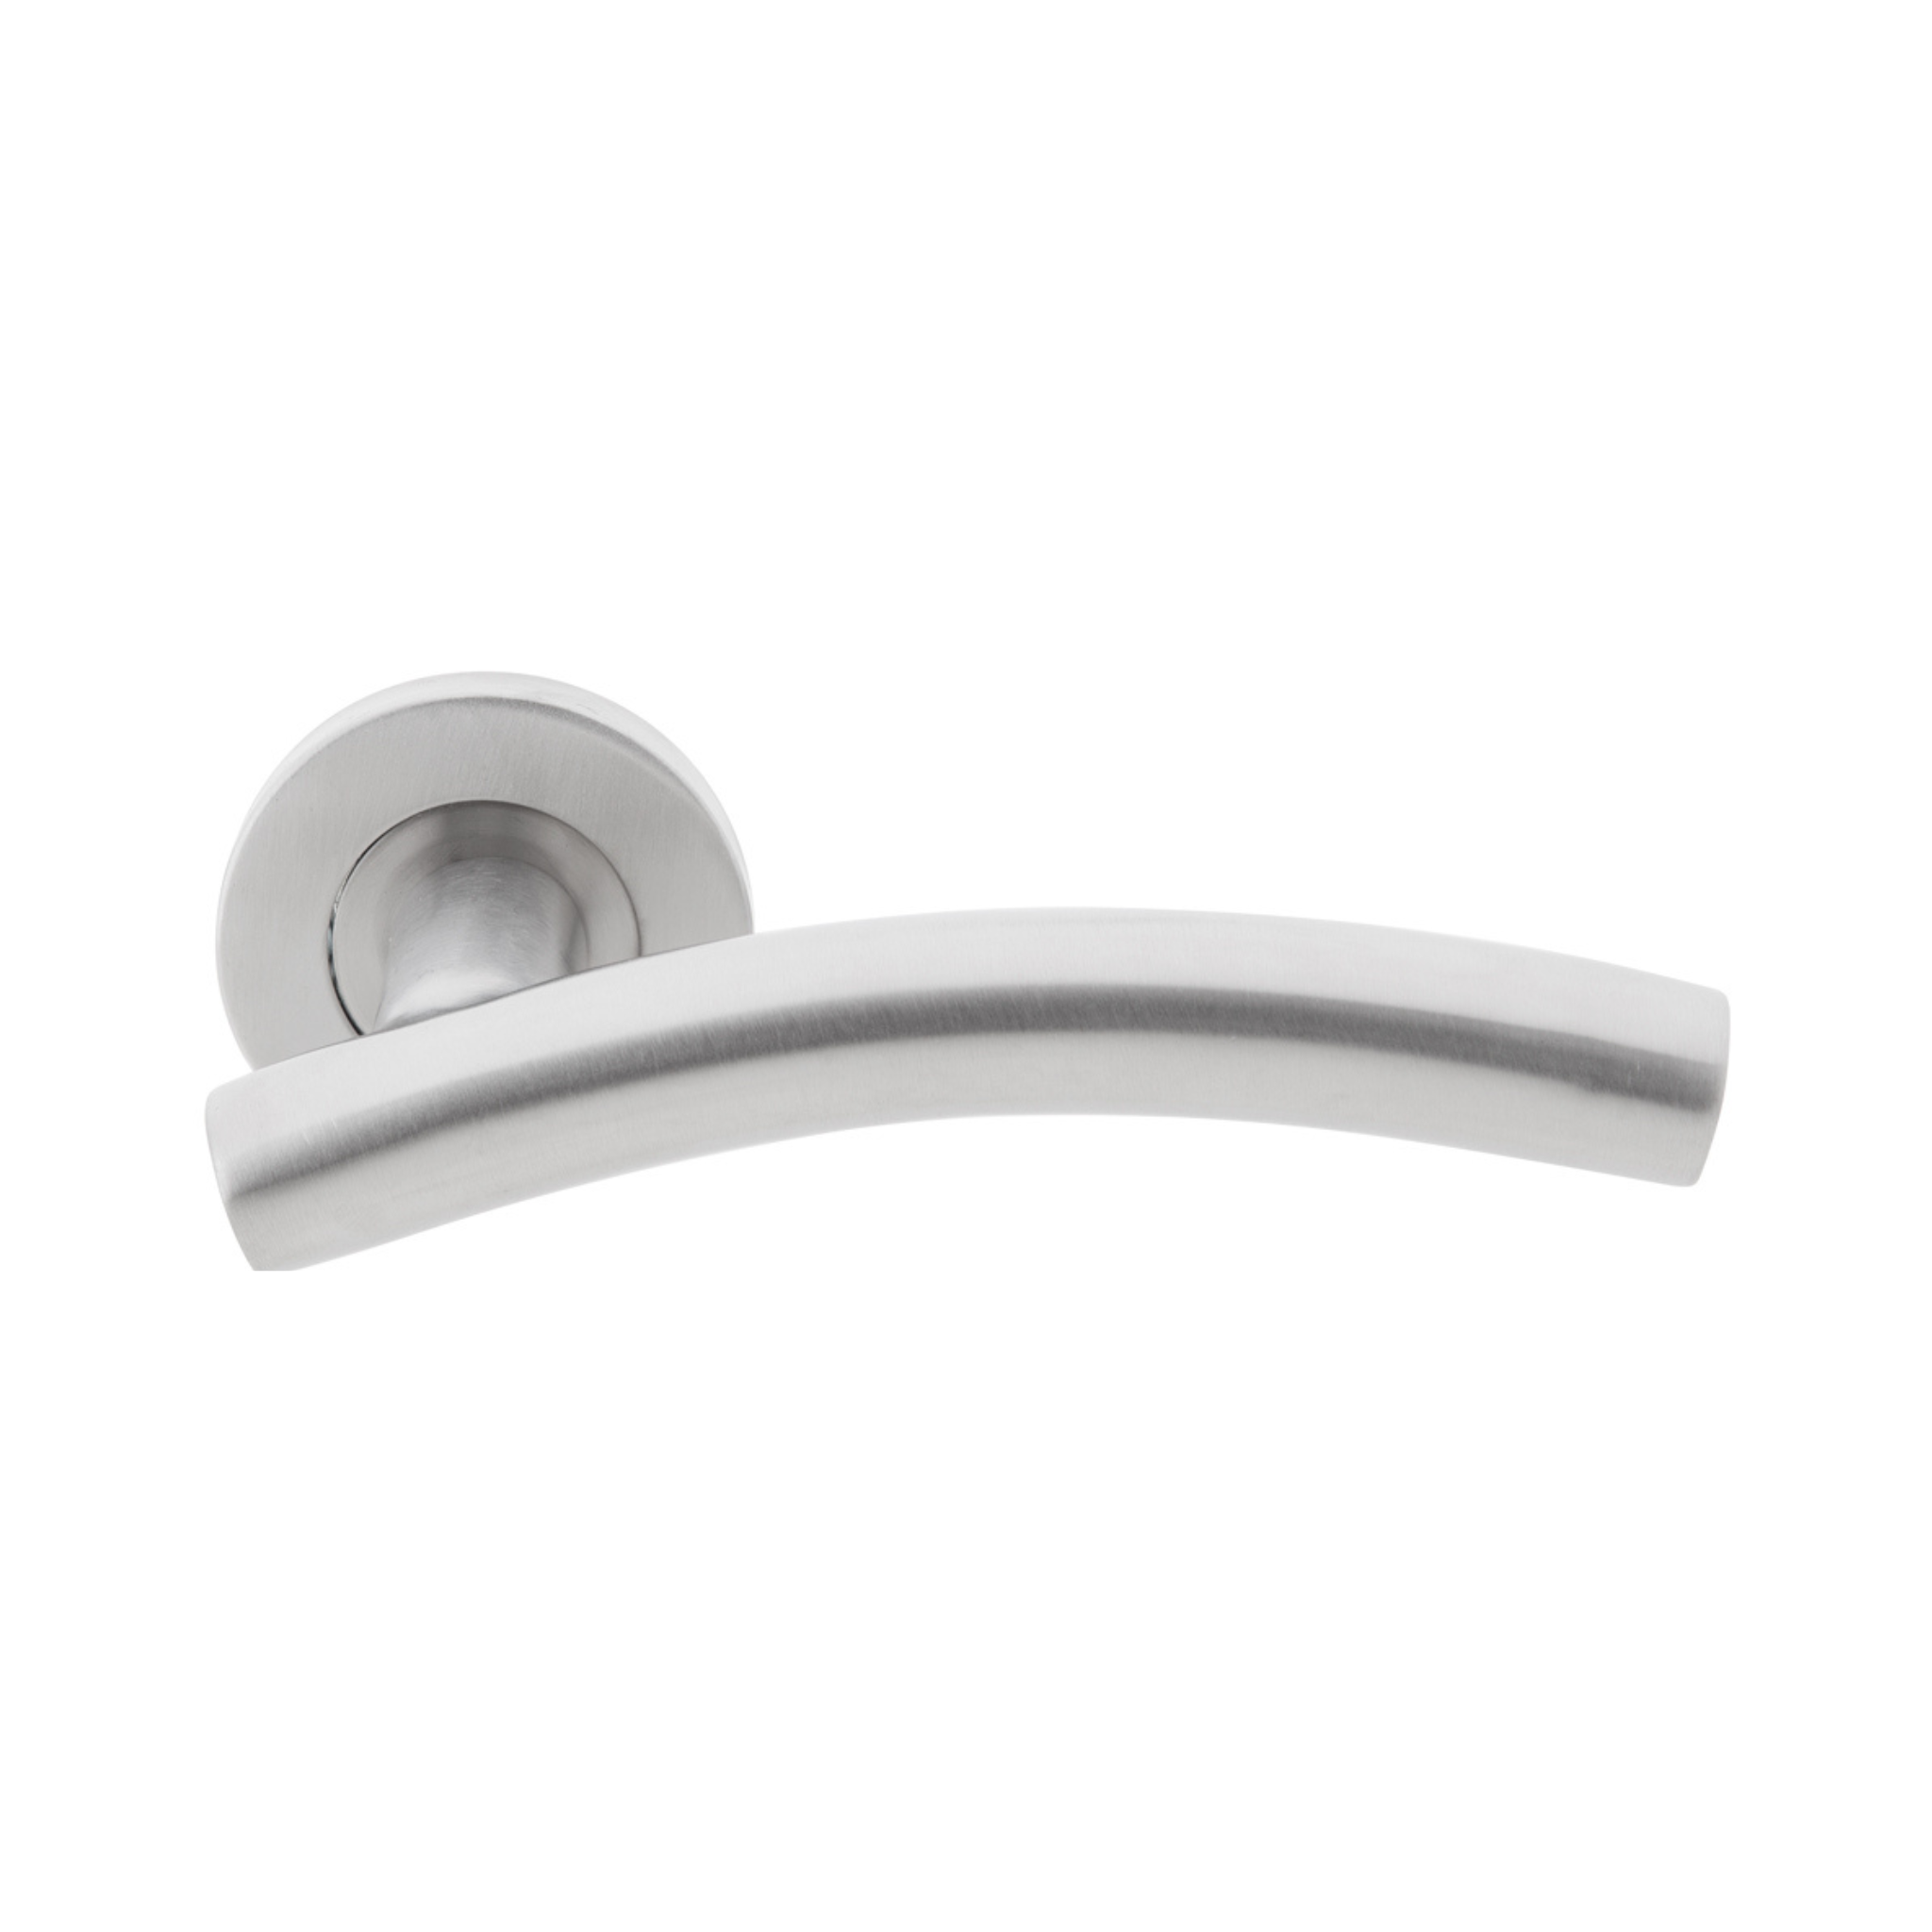 TH 121, Lever Handles, Tubular, On Round Rose, With Escutcheons, 137mm (l), Stainless Steel, DORMAKABA